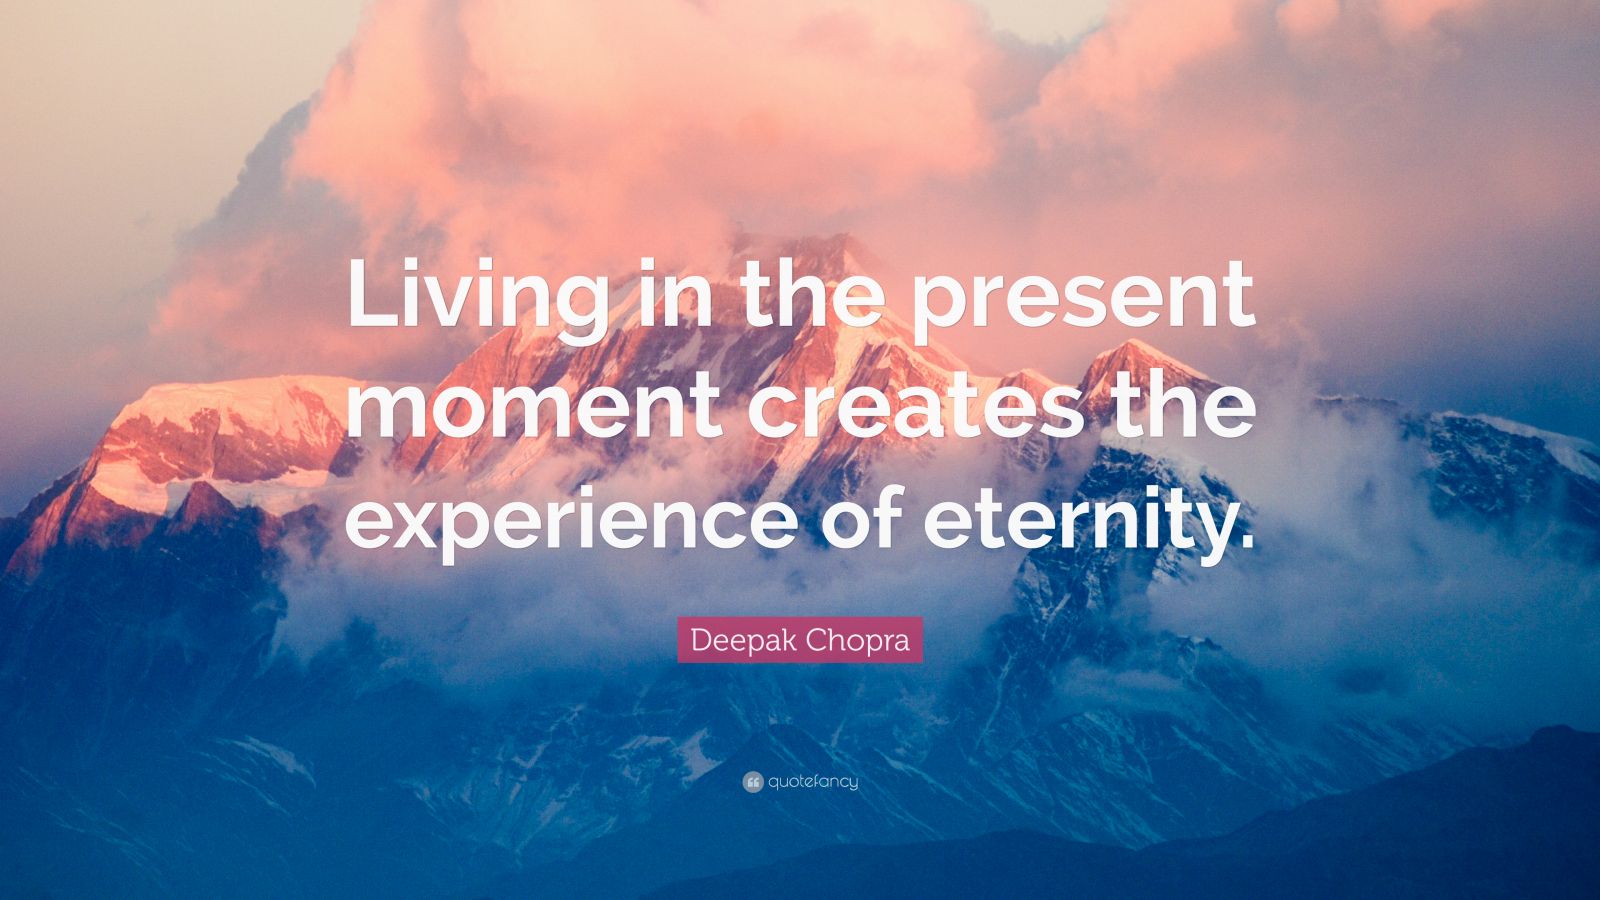 Deepak Chopra Quote: “Living in the present moment creates the ...